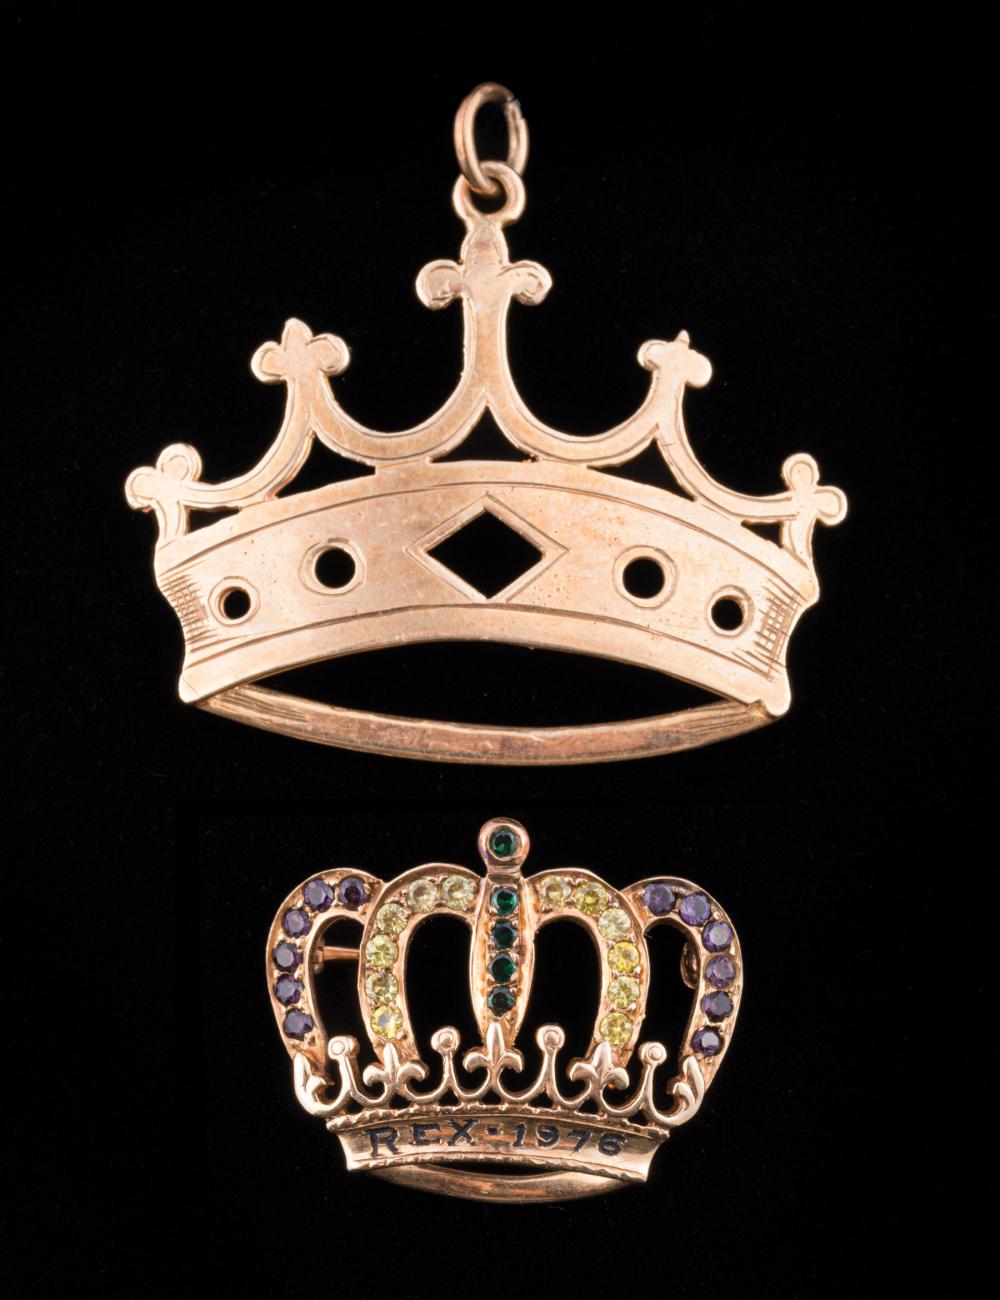 14 KT YELLOW GOLD CROWN PENDANT14 31a4f7